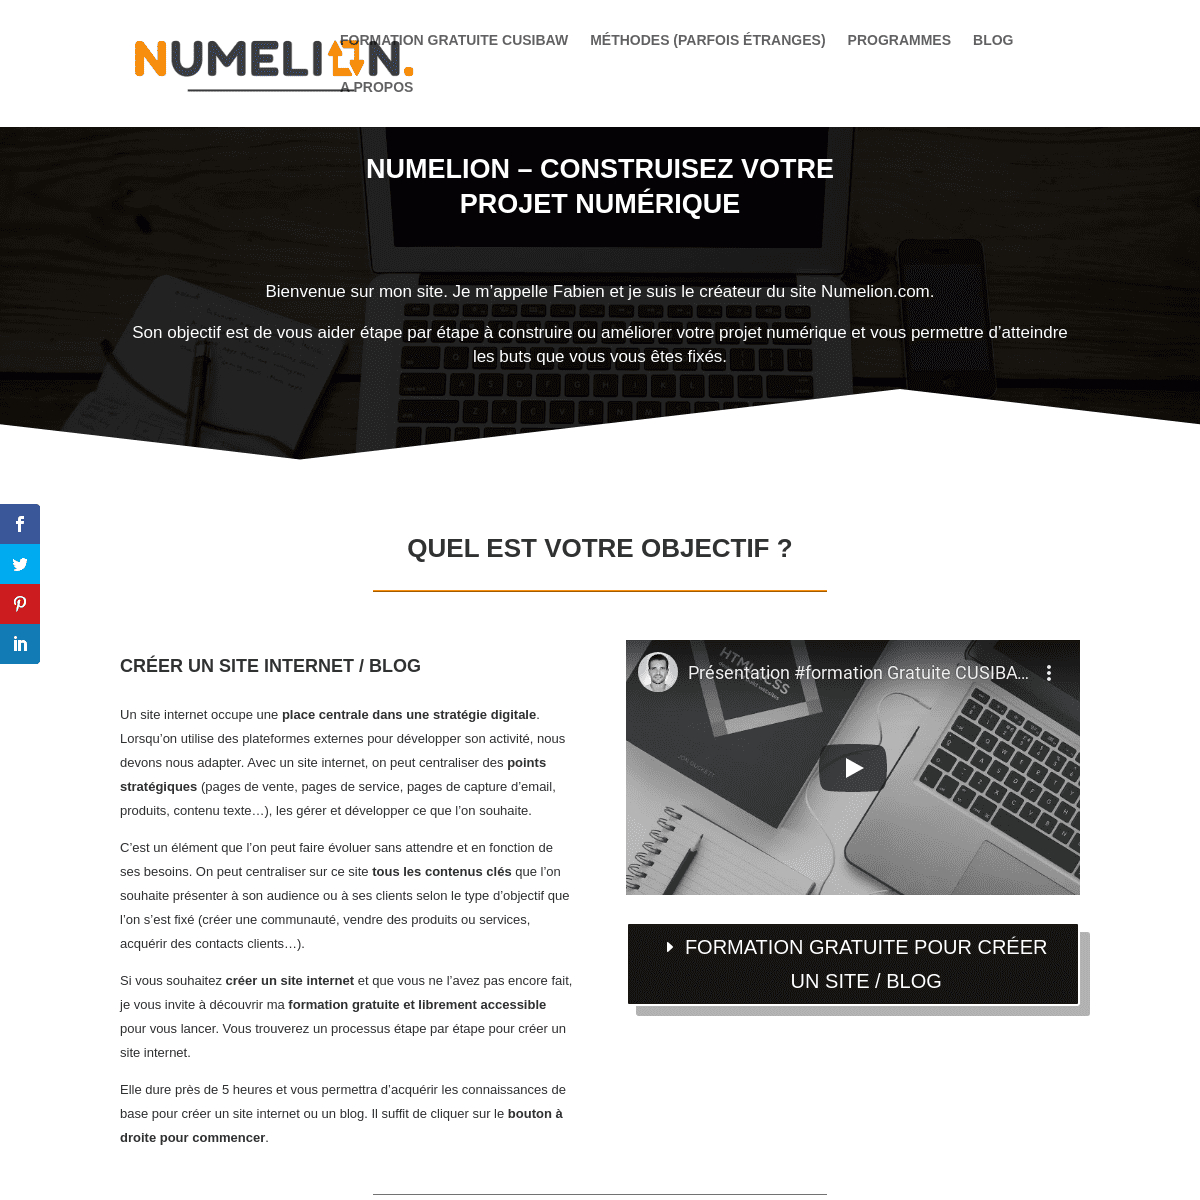 A complete backup of numelion.com